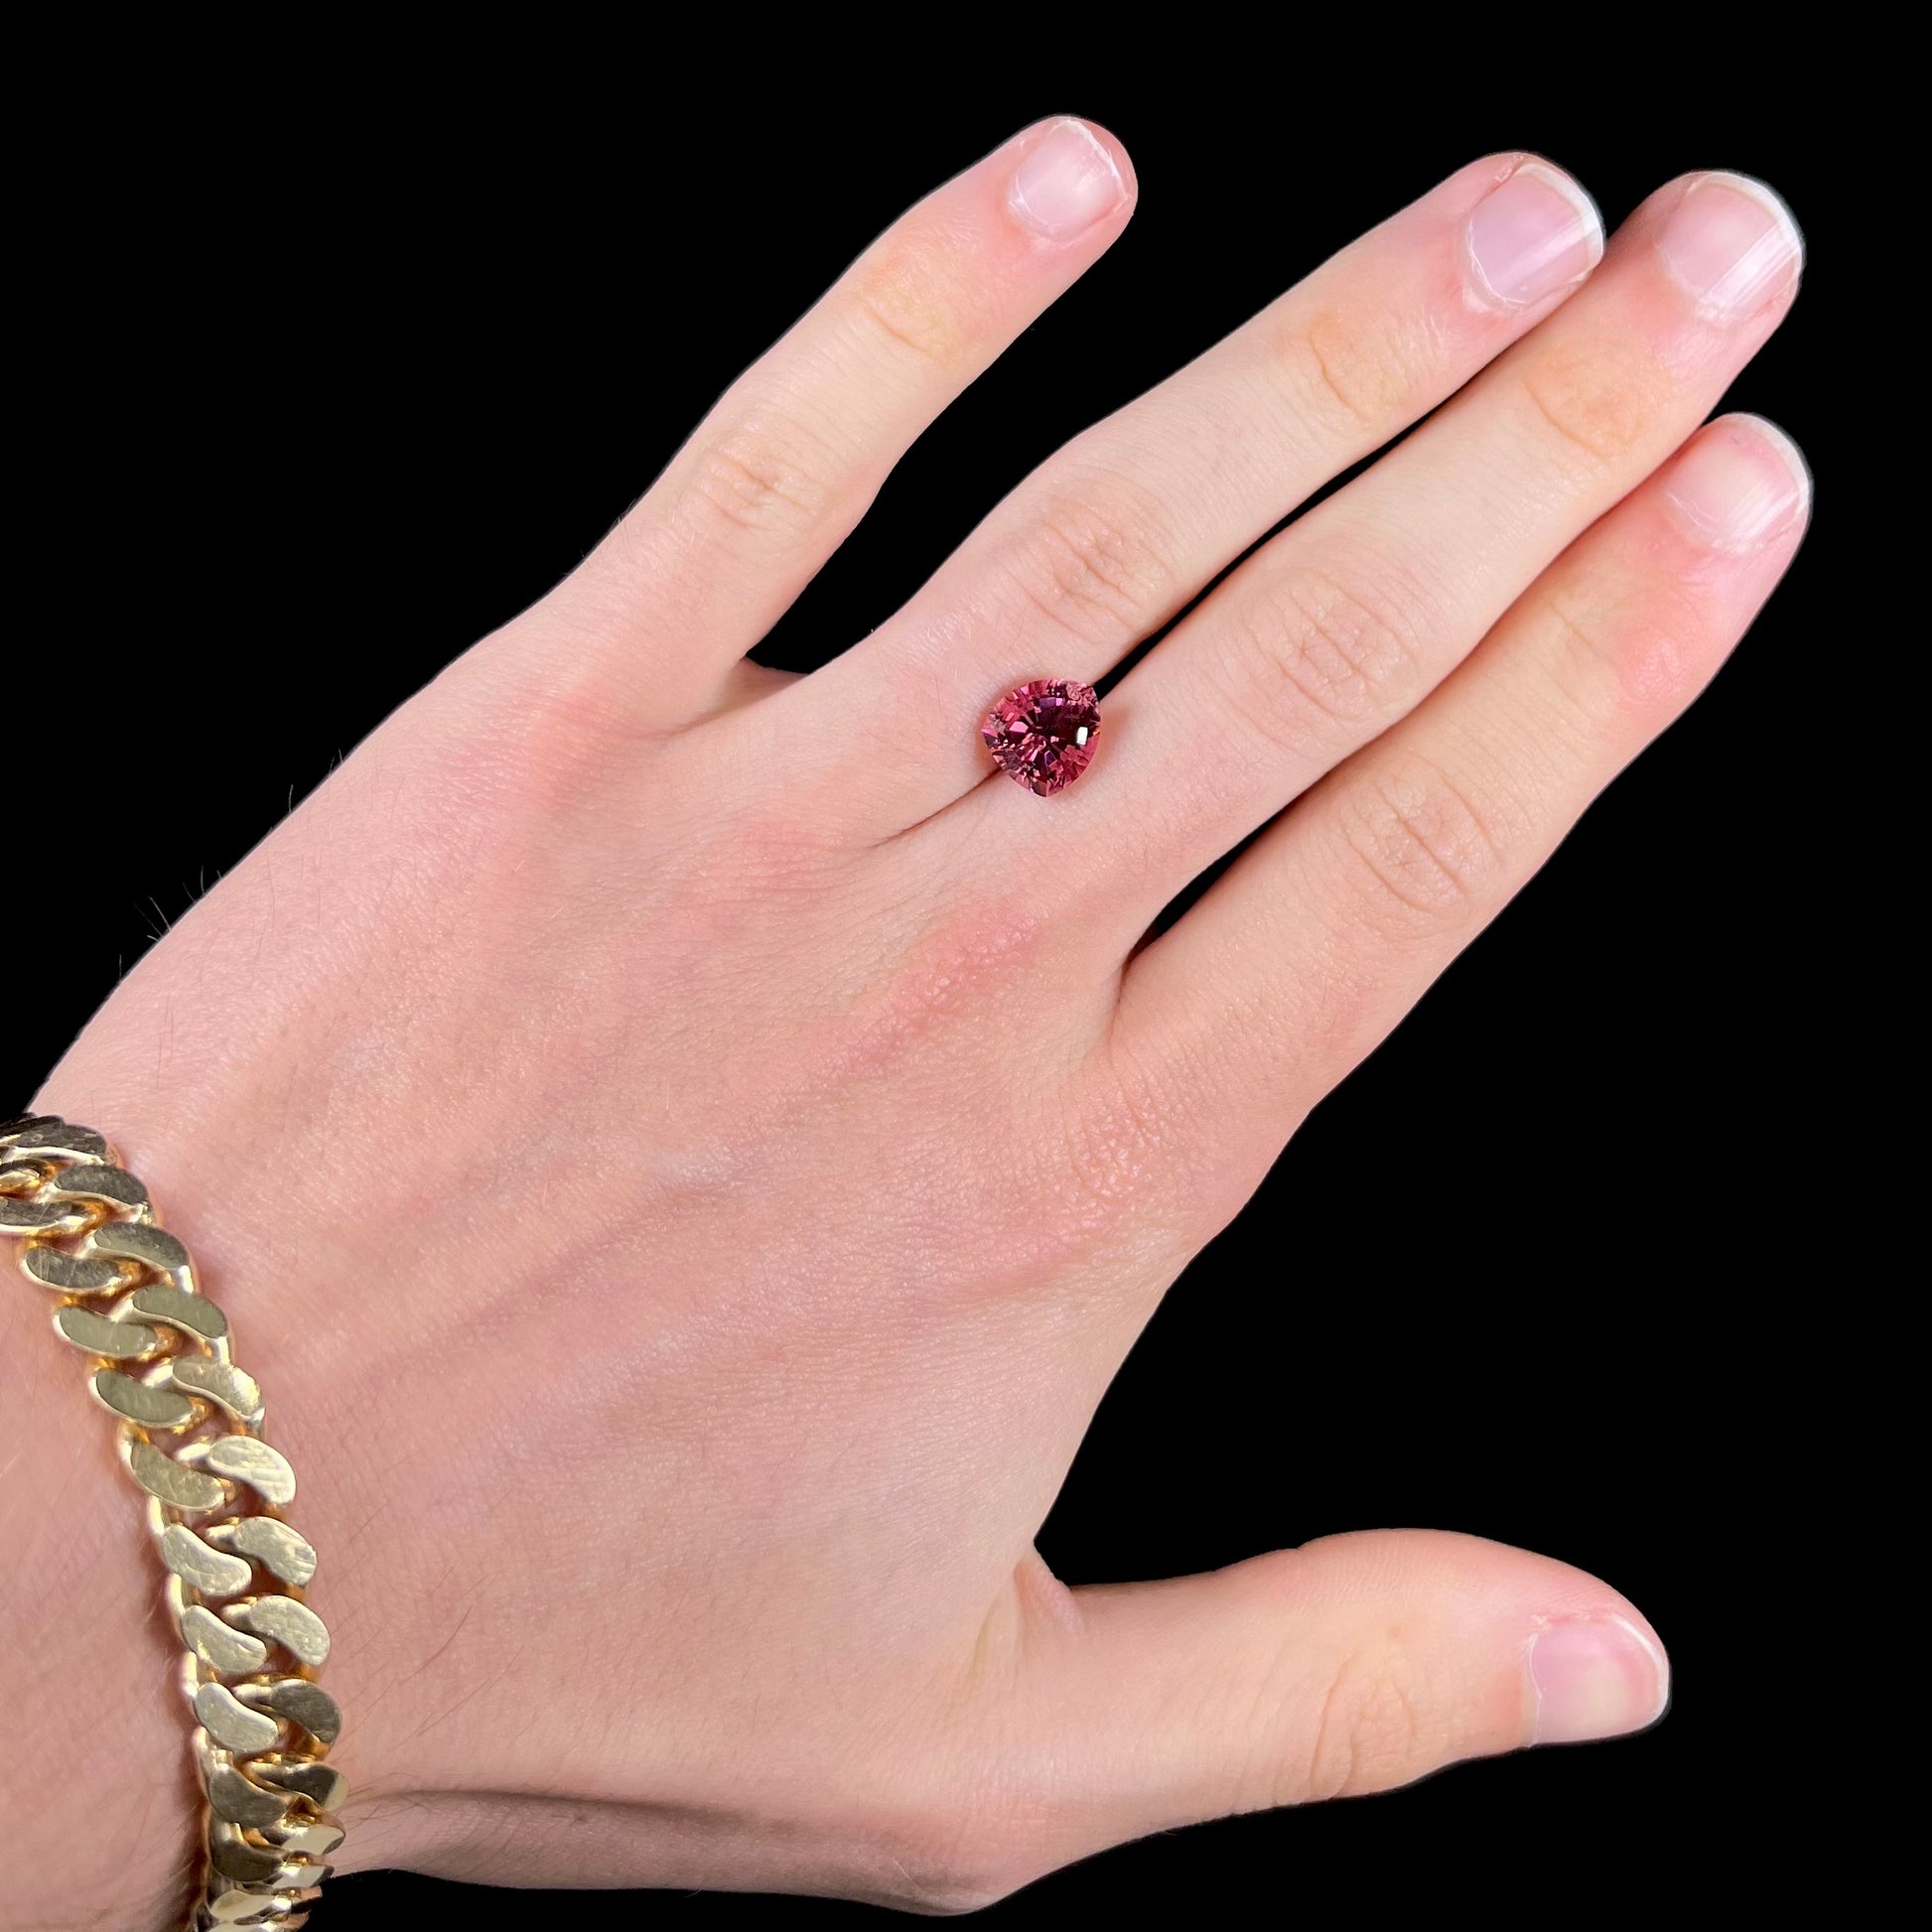 A loose, rounded trillion shield cut pink tourmaline gemstone.